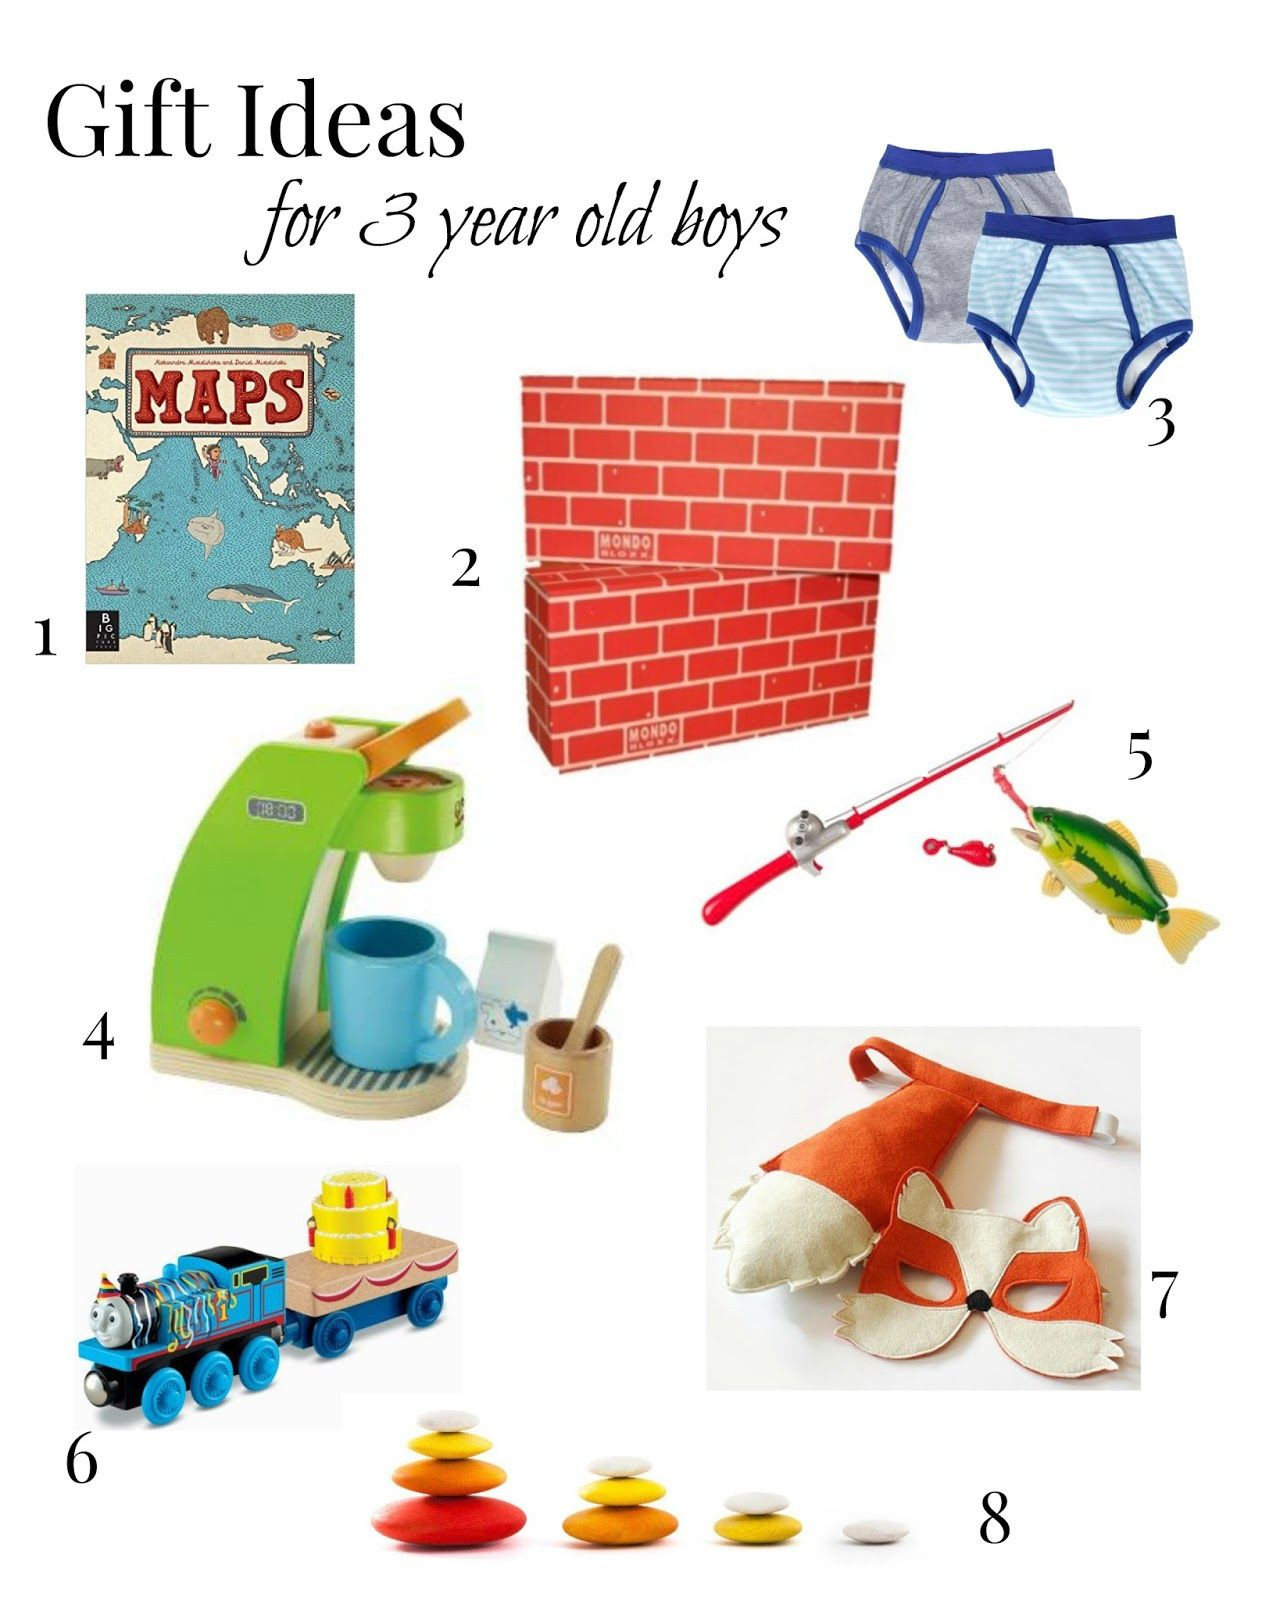 3 Year Old Gift Ideas Boys
 Friday Favorites Gift Ideas For 3 Year Old Boys